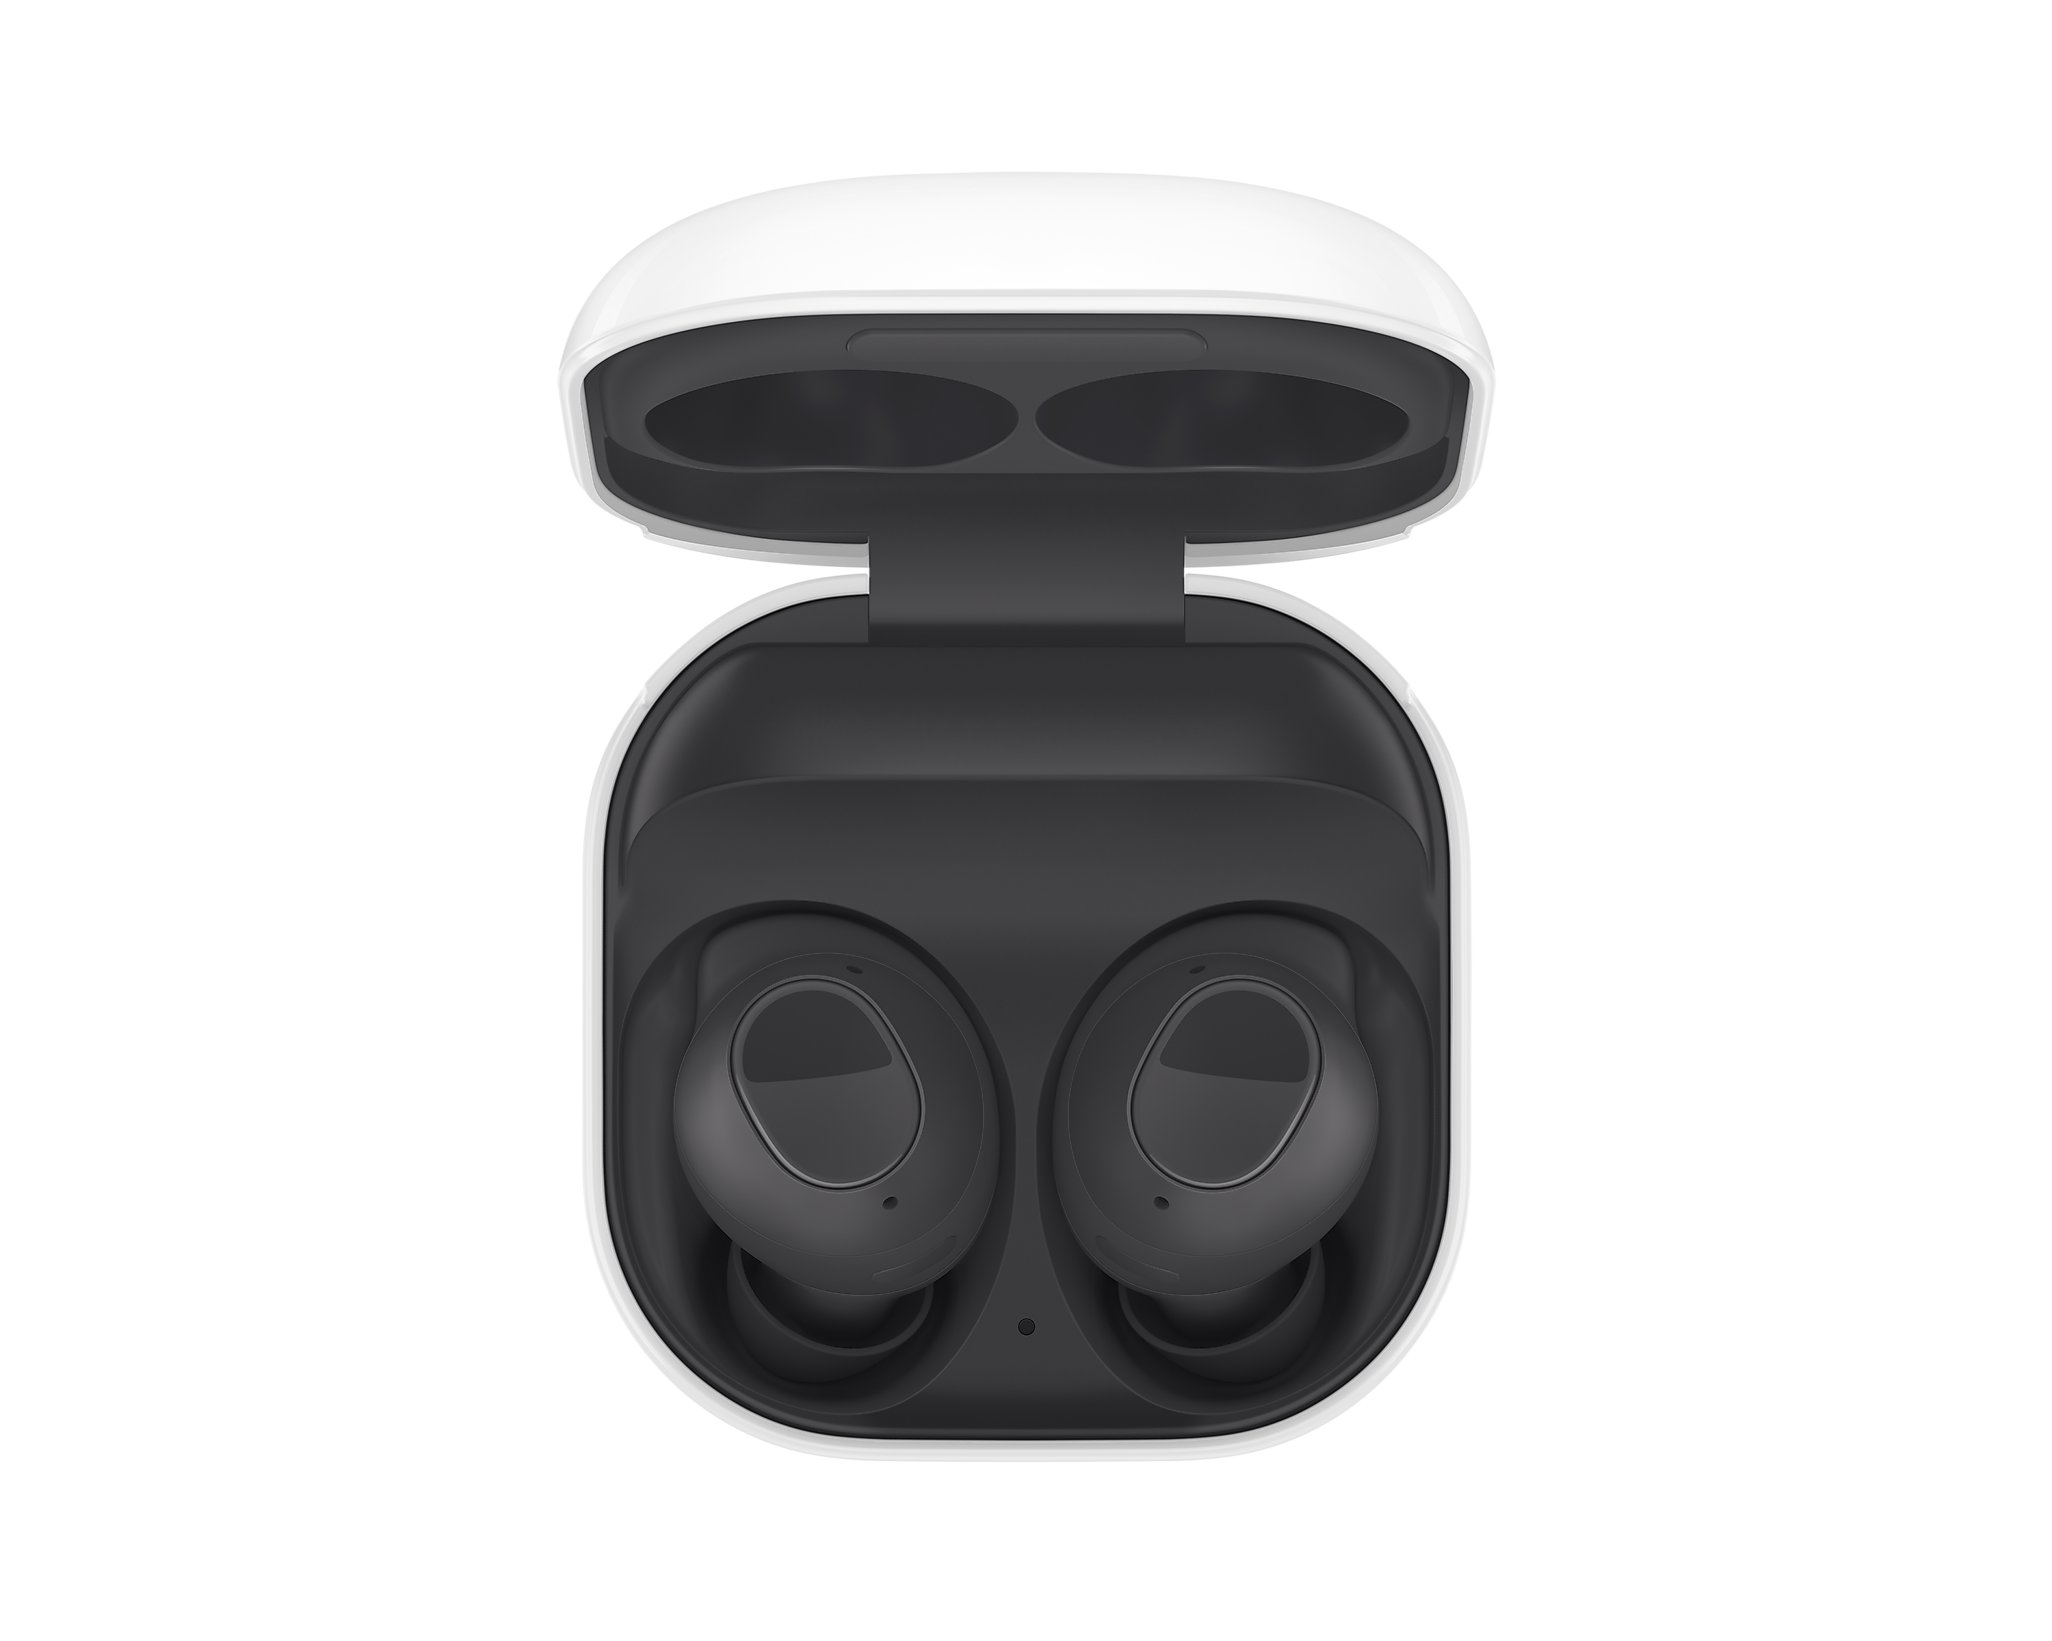 Samsung leaks the Galaxy Buds FE by posting their user manual - The Verge